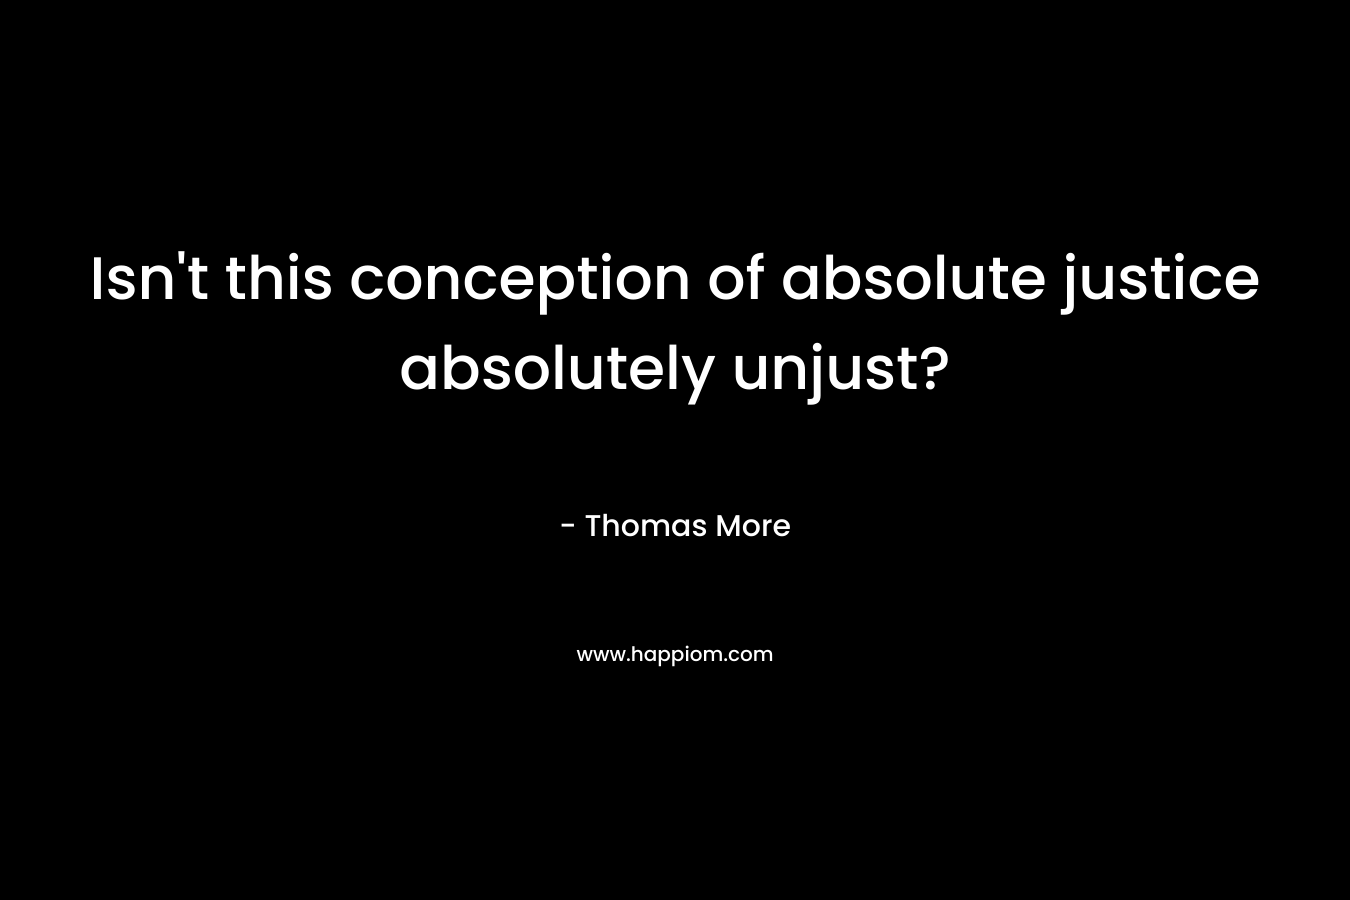 Isn’t this conception of absolute justice absolutely unjust? – Thomas More